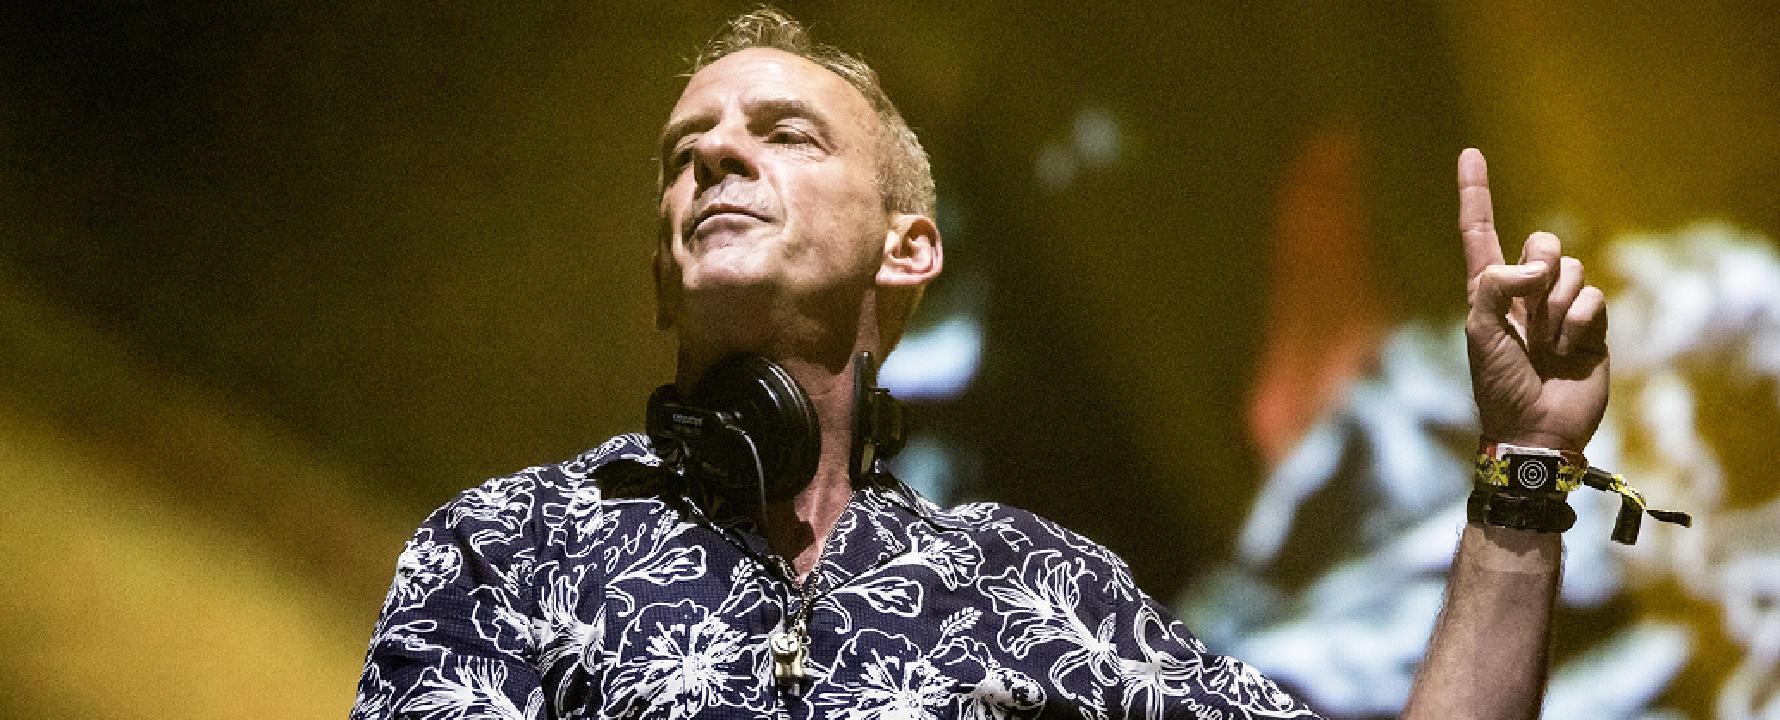 Promotional photograph of Fatboy Slim.